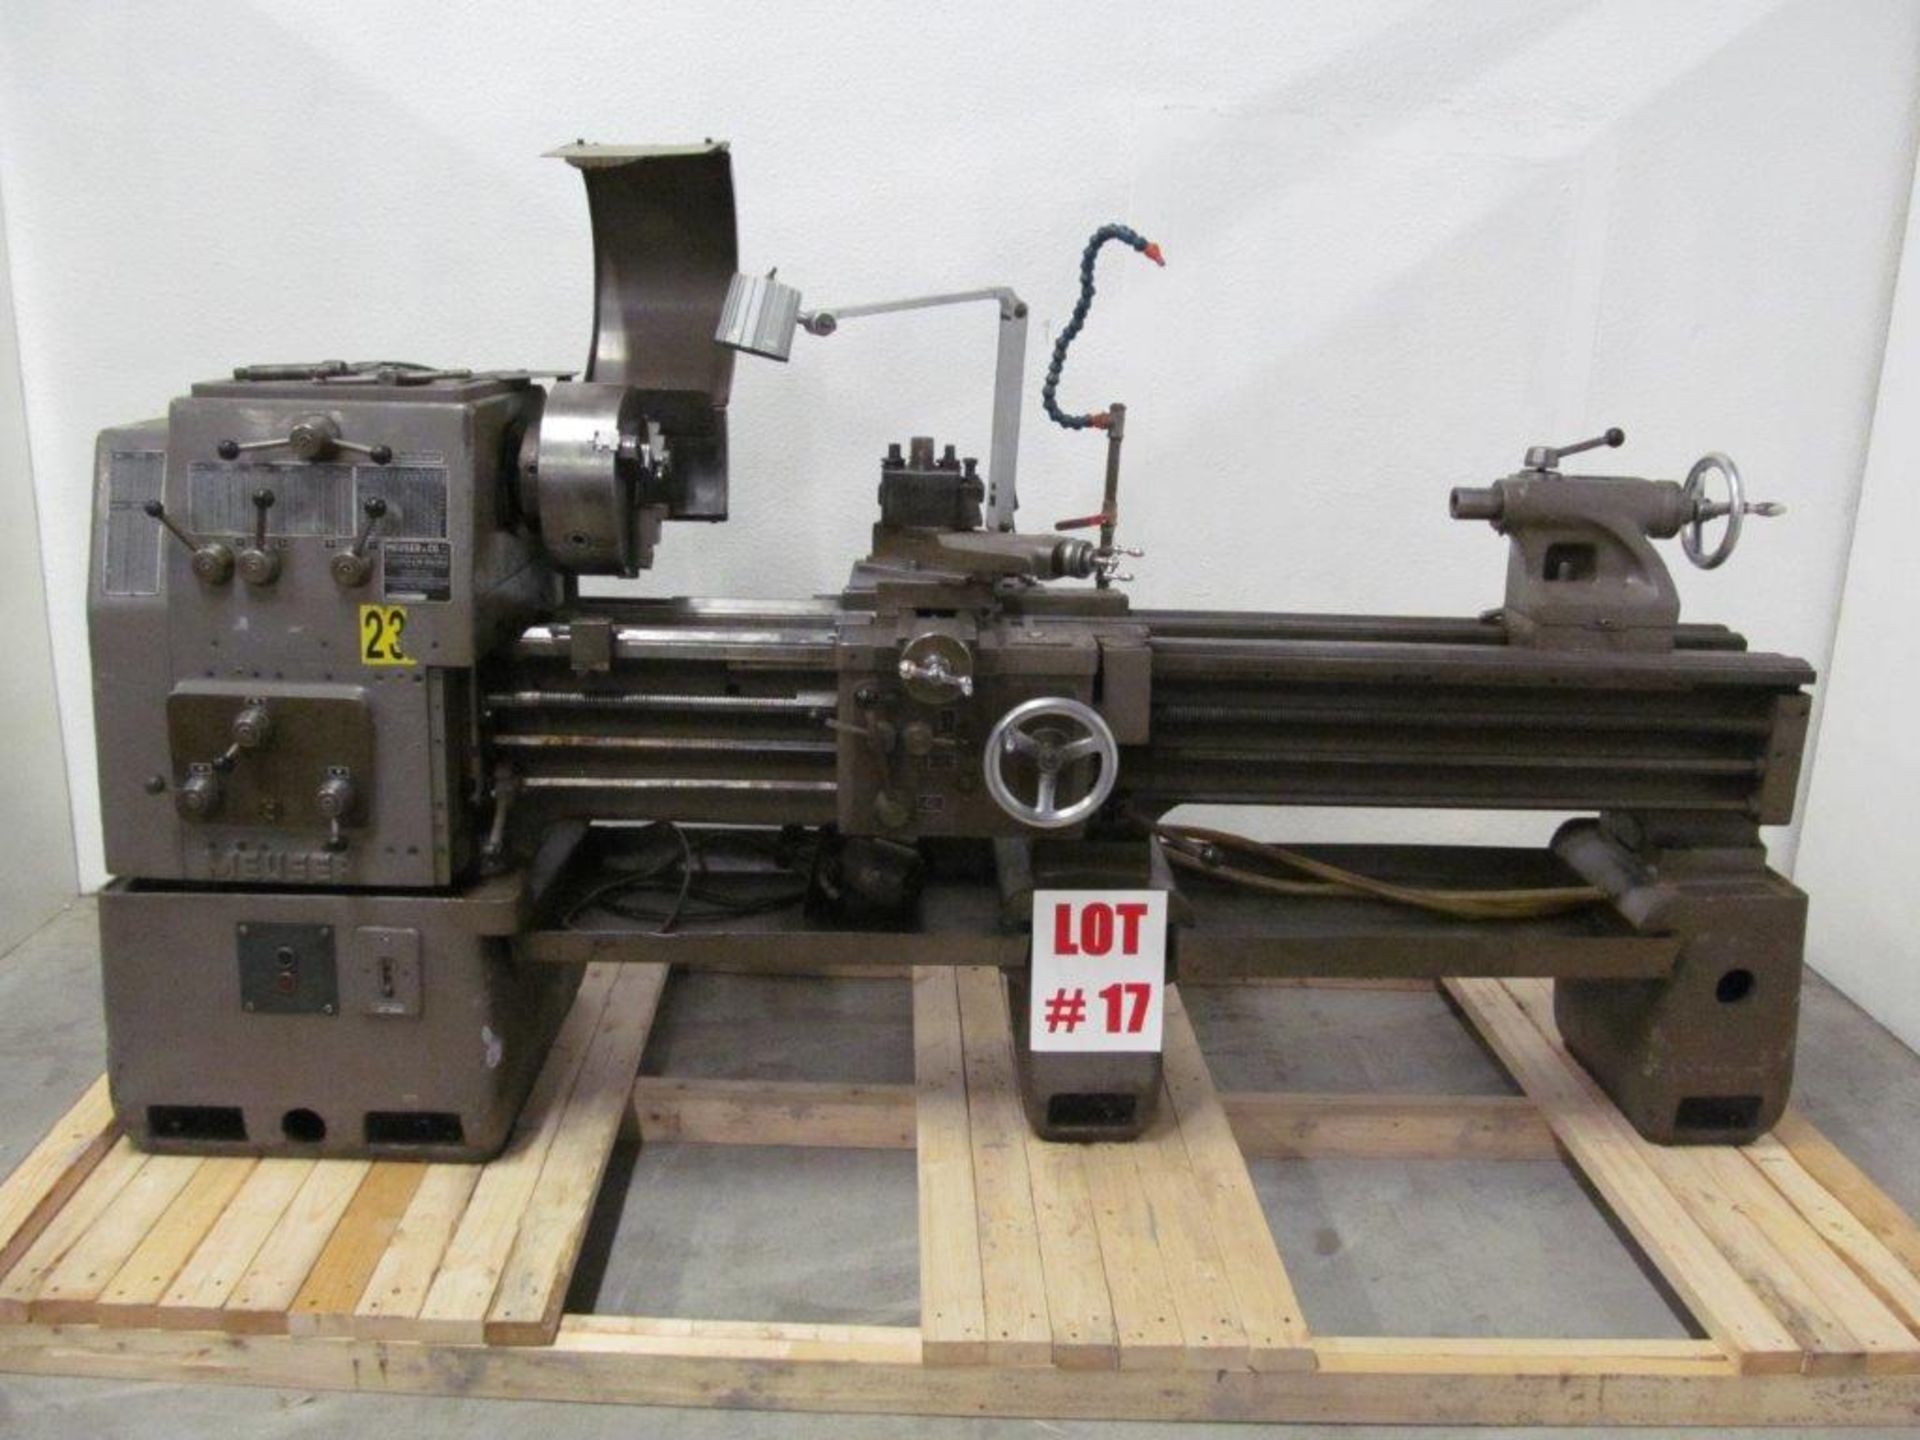 MEUSER (GERMANY ENGINE LATHE, 20" SWING X 60" CENTERS, SPINDLE HOLE: 2", C/W 12" 3-JAW CHUCK,